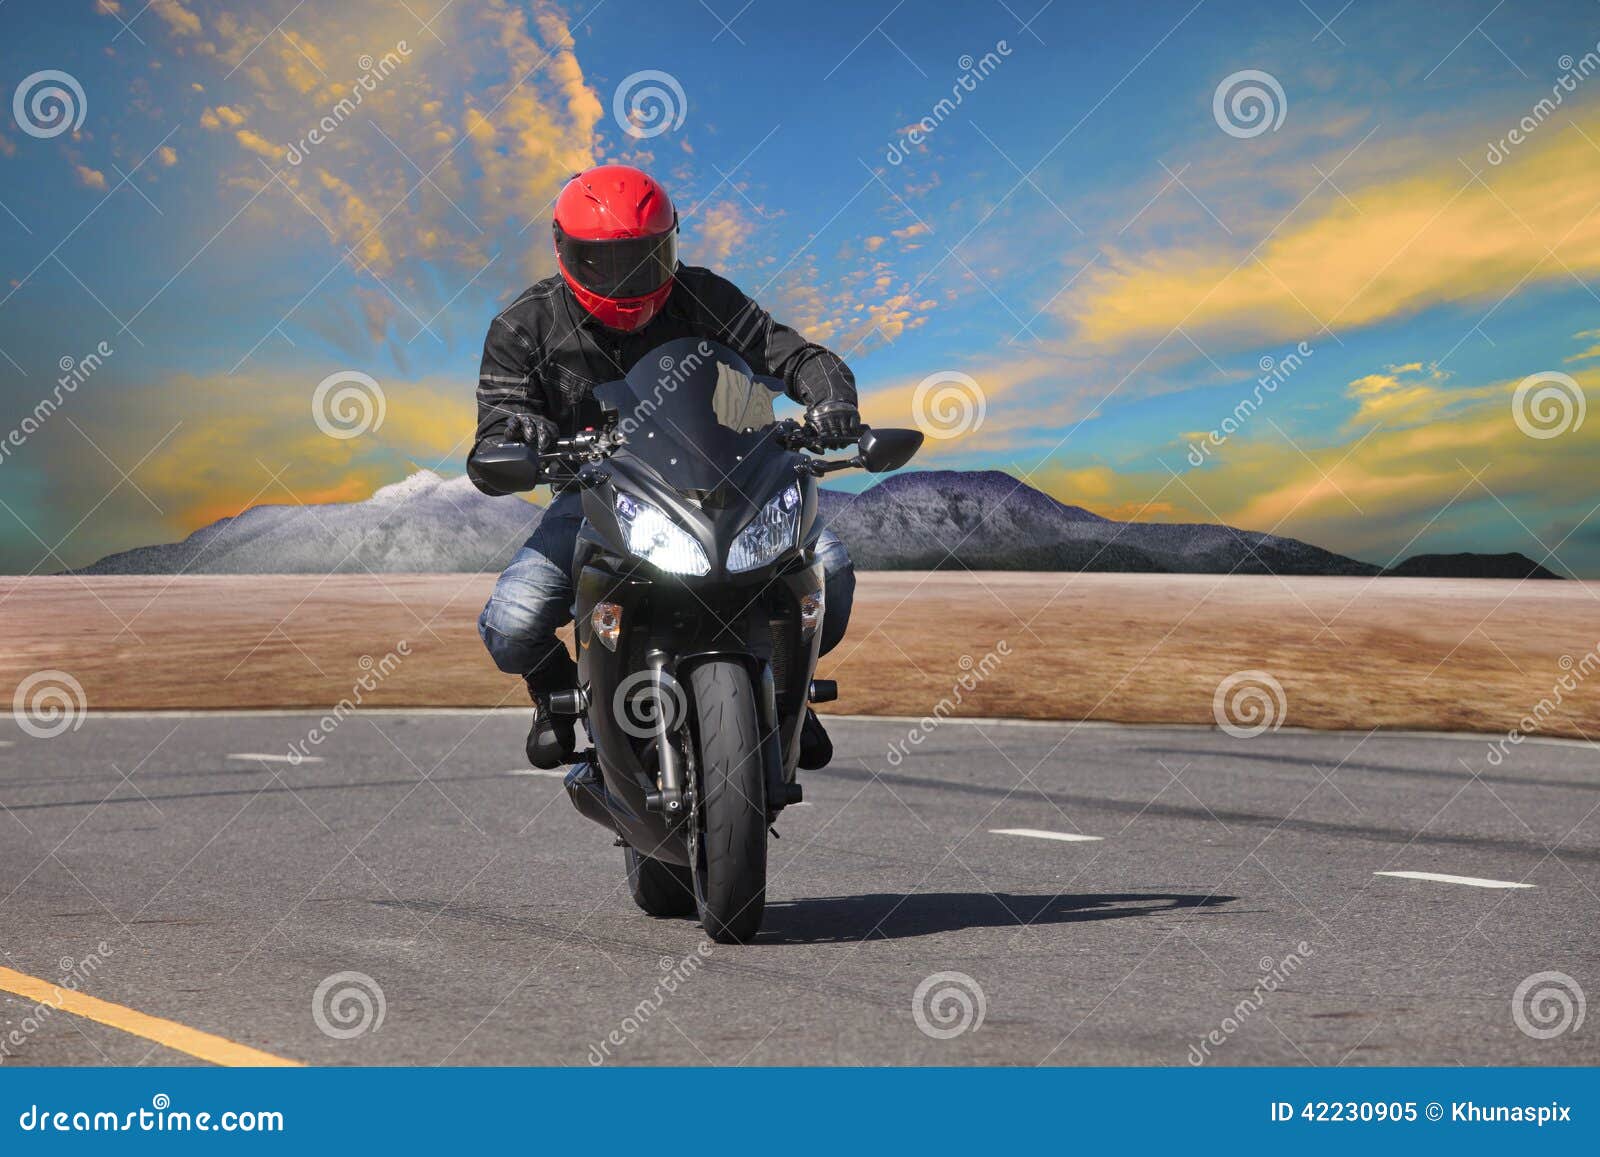 Young Man Riding Motorcycle In Asphalt Road Curve Use For Extrem Stock